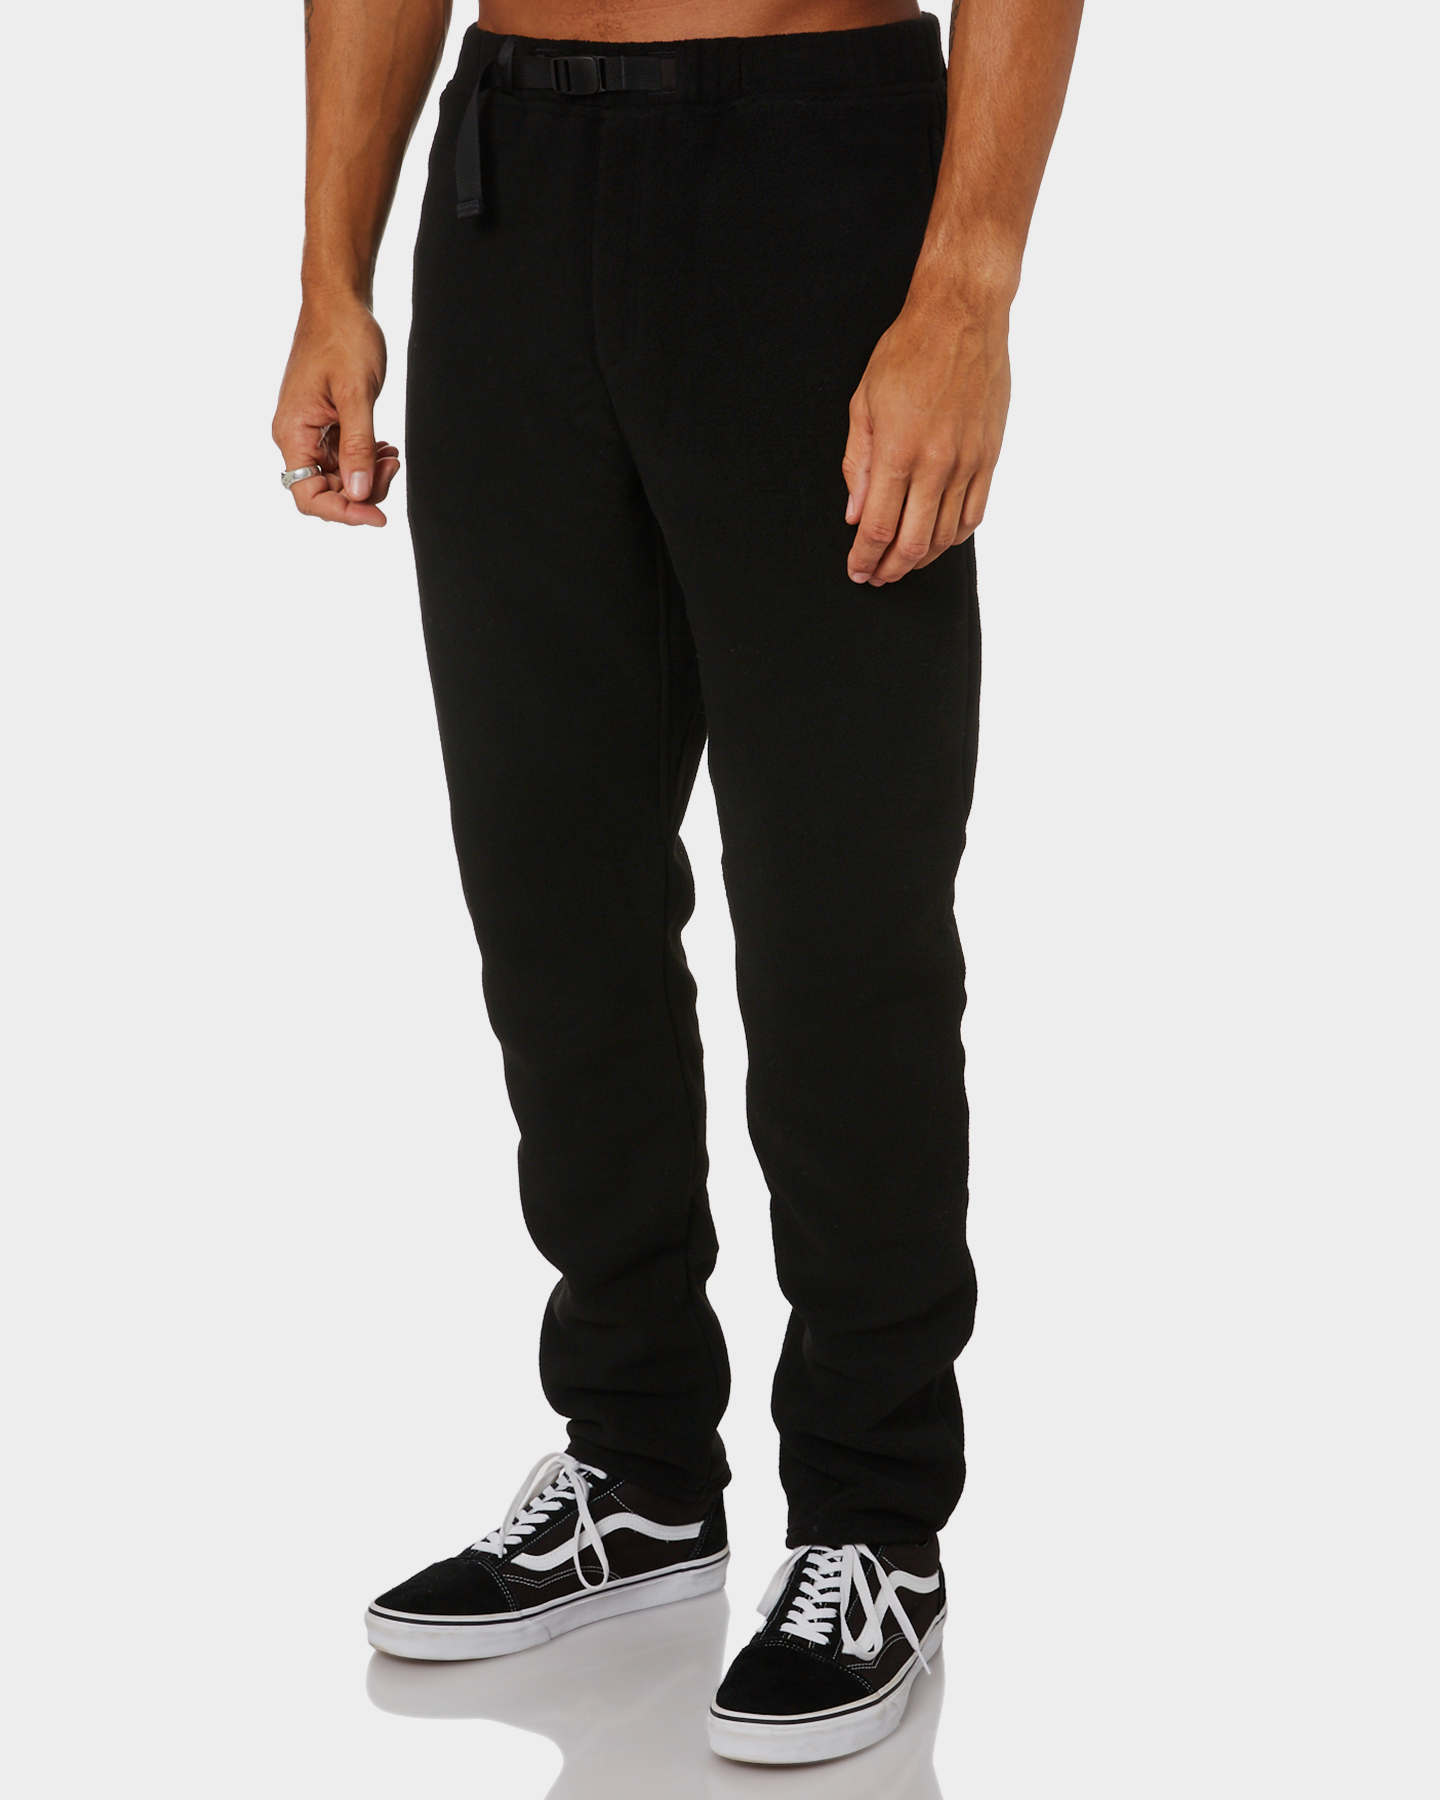 Patagonia Lightweight Synchilla Snap-T Mens Pants - Black | SurfStitch